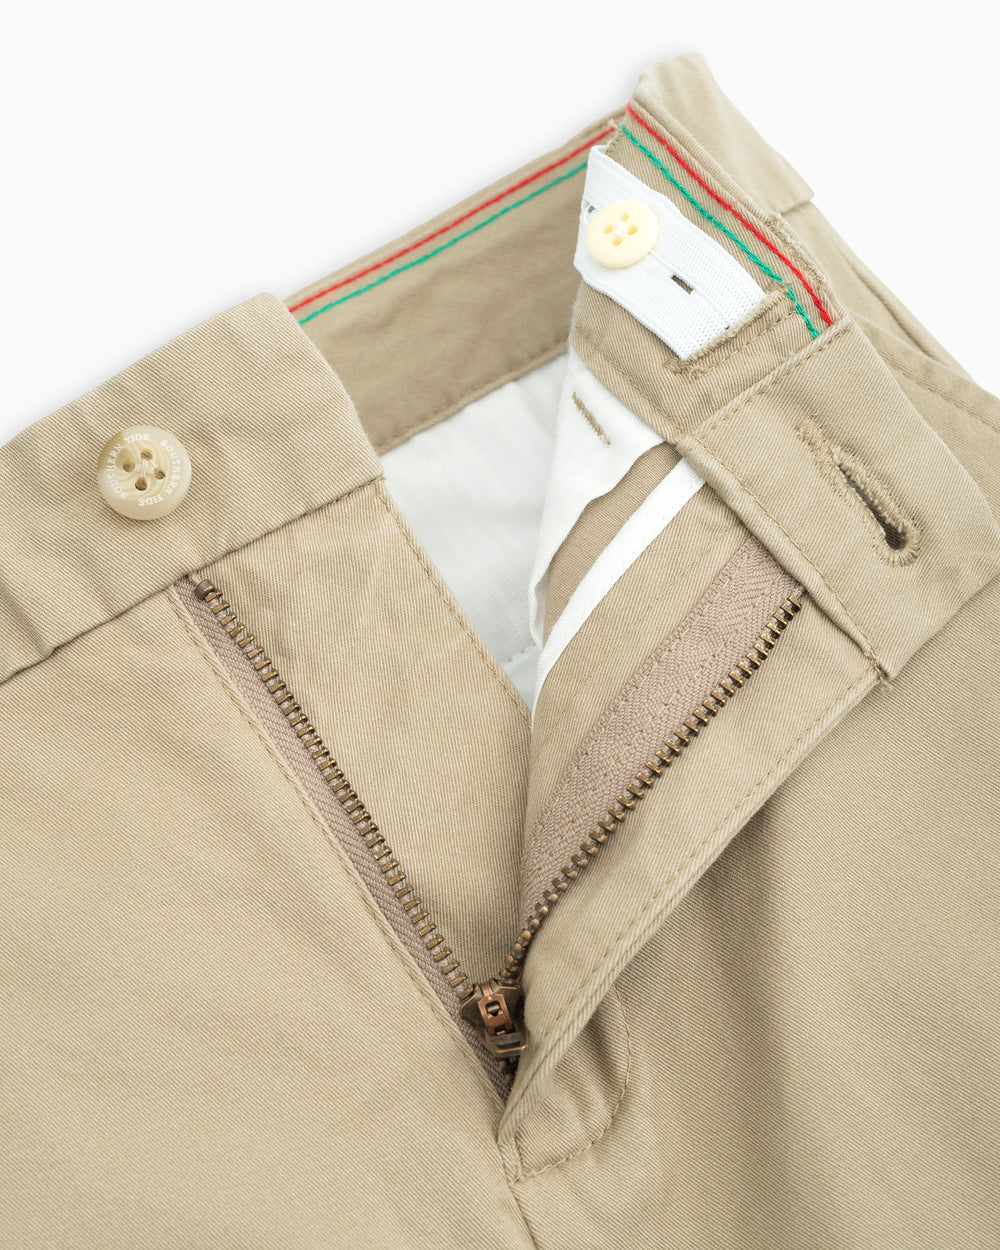 The detail view of the Boys Channel Marker Pant by Southern Tide - Sandstone Khaki